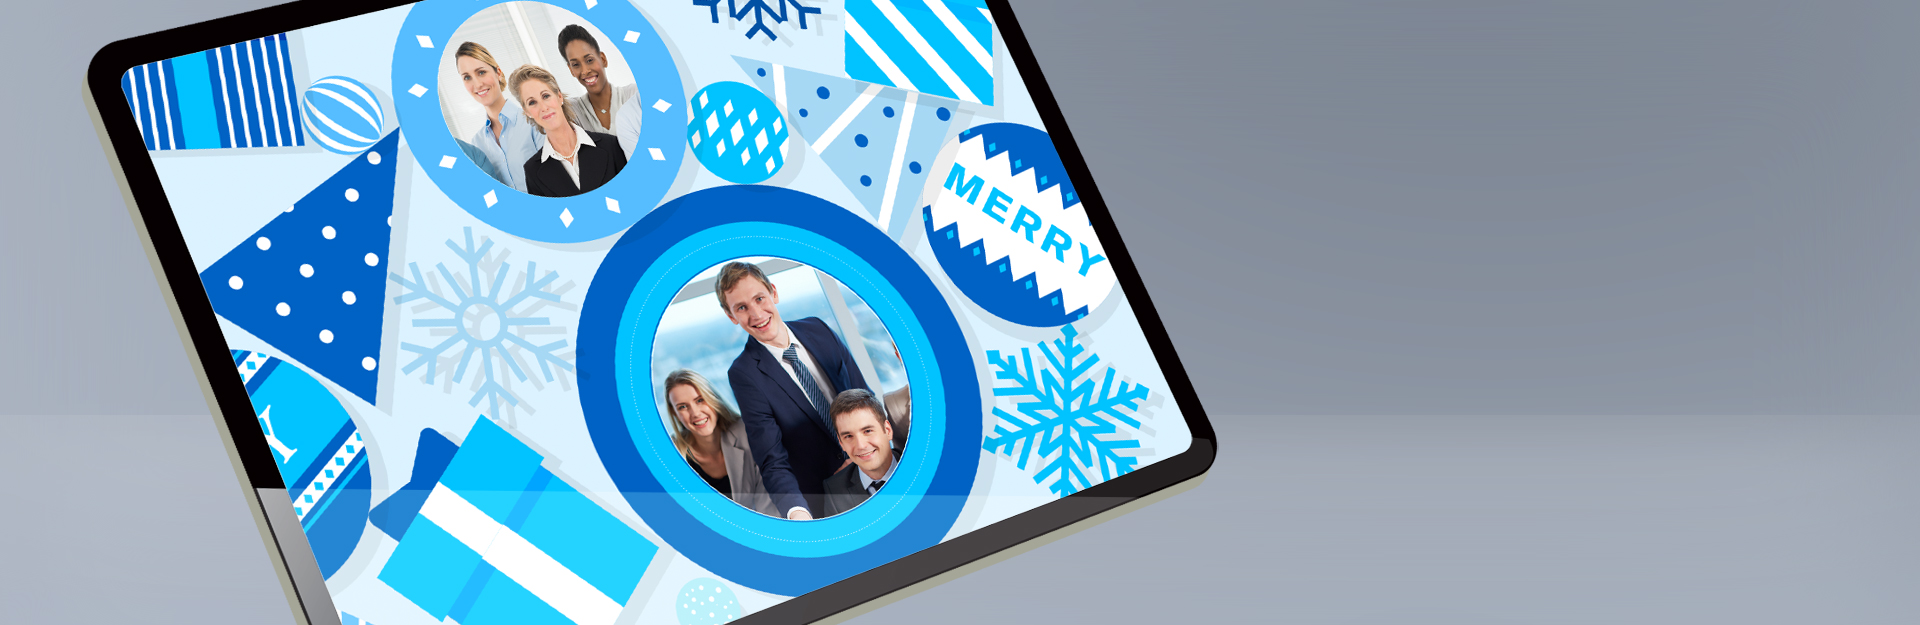 Photos on tablet depict appreciation Christmas cards with text "Picture perfect features"